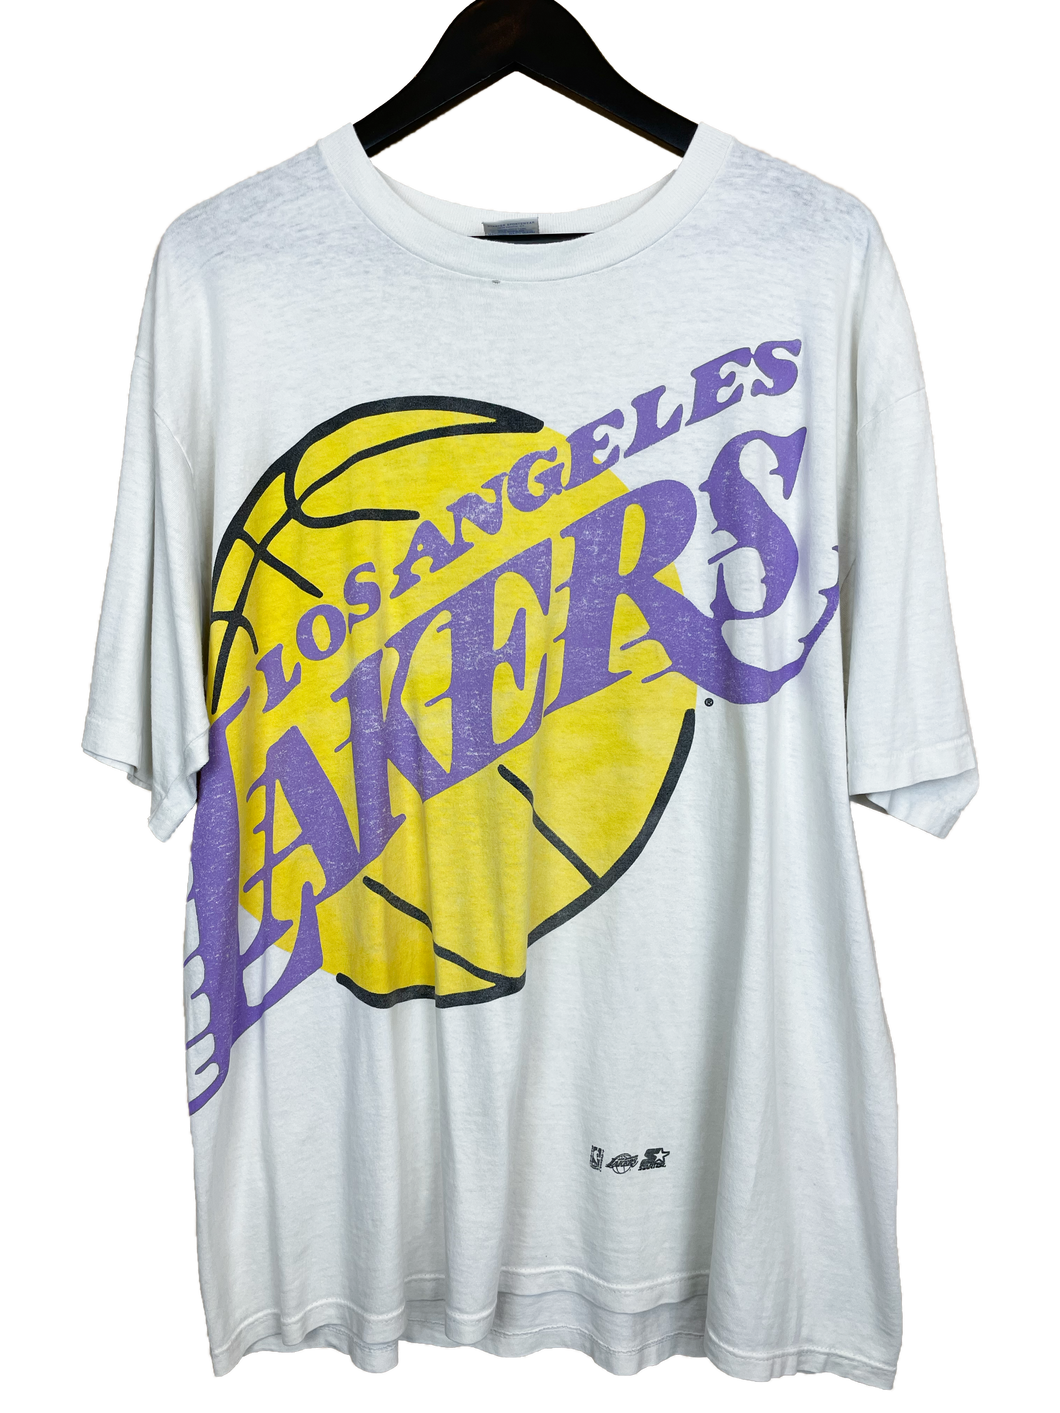 VINTAGE LAKERS STARTER 'SS' TEE - XL